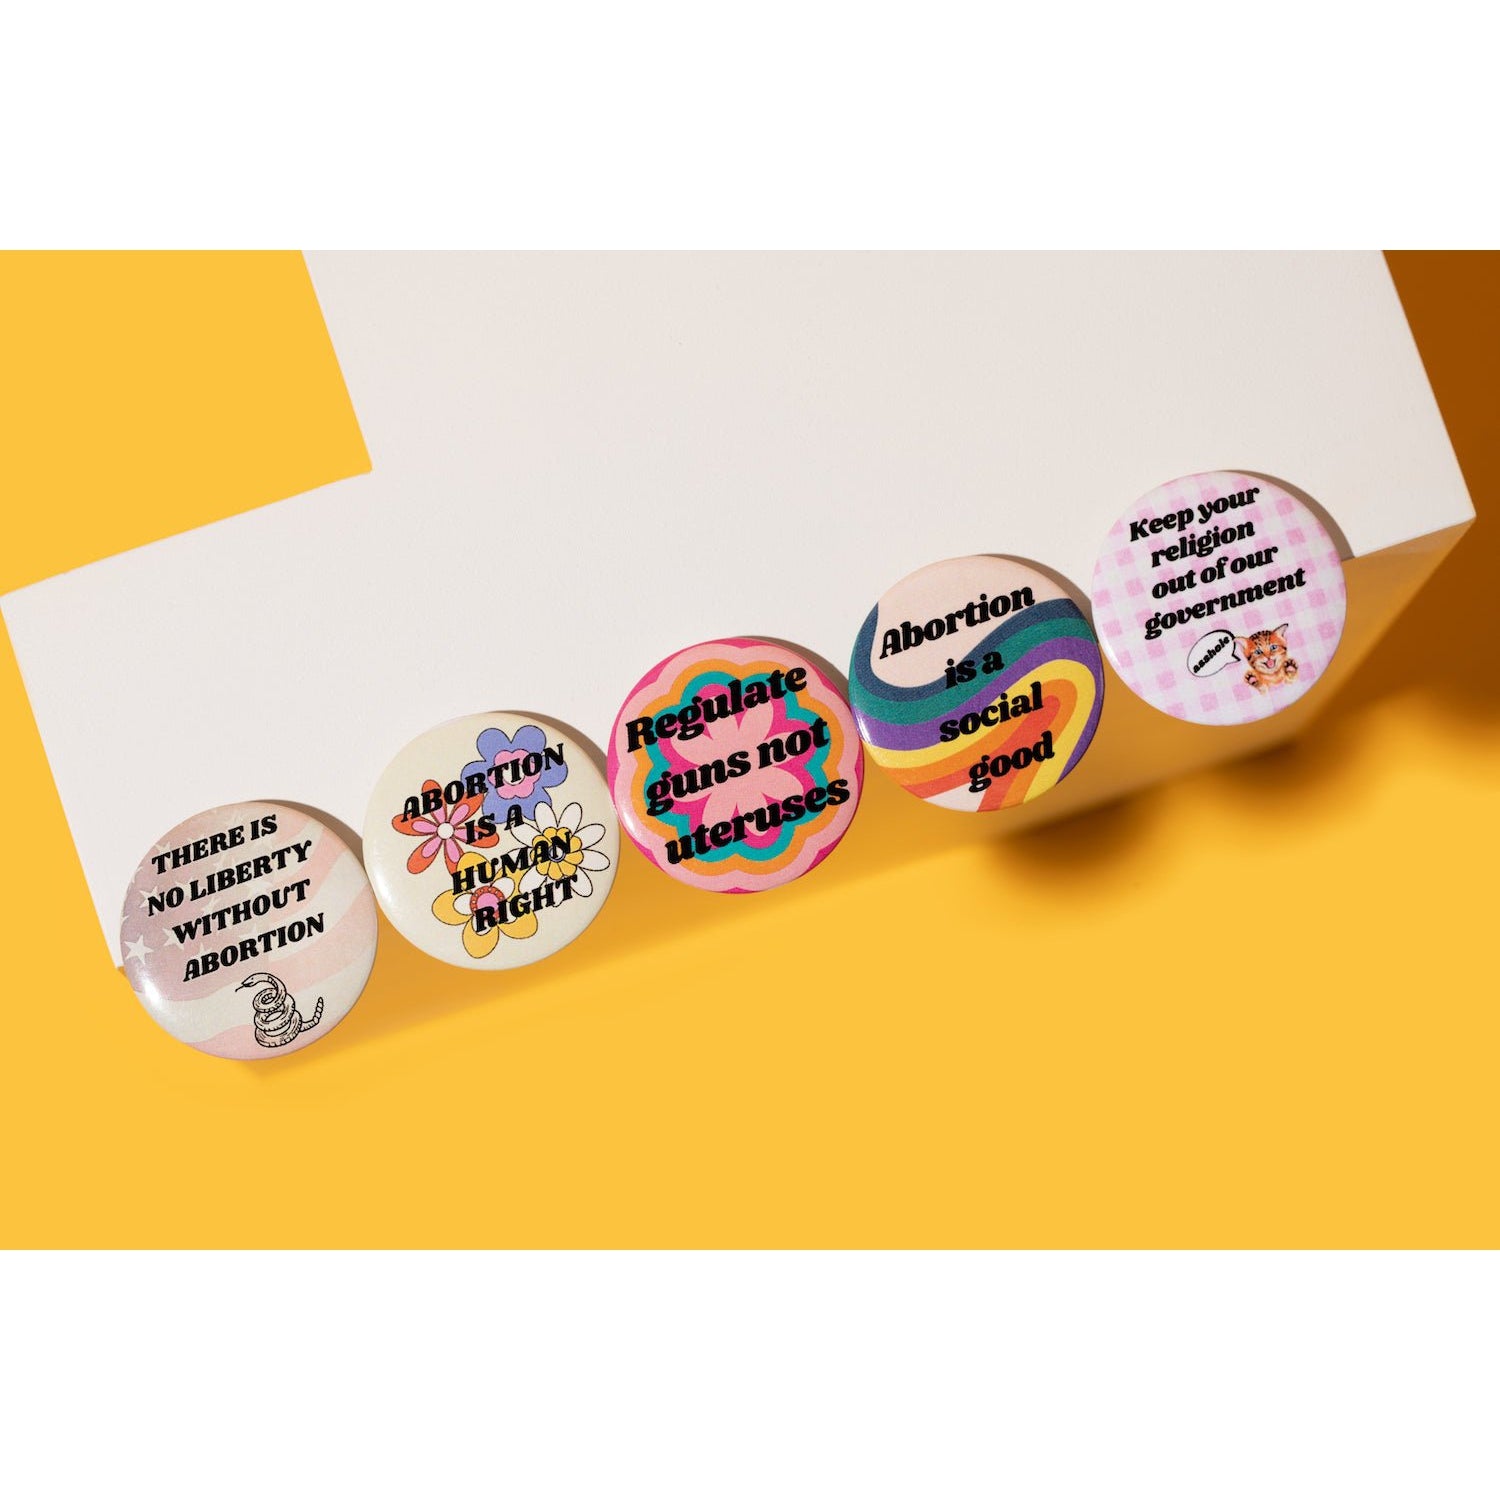 Pro-Choice Abortion Rights Pinback Button Set of 5 | Feminist Reproductive Rights Pin Badges